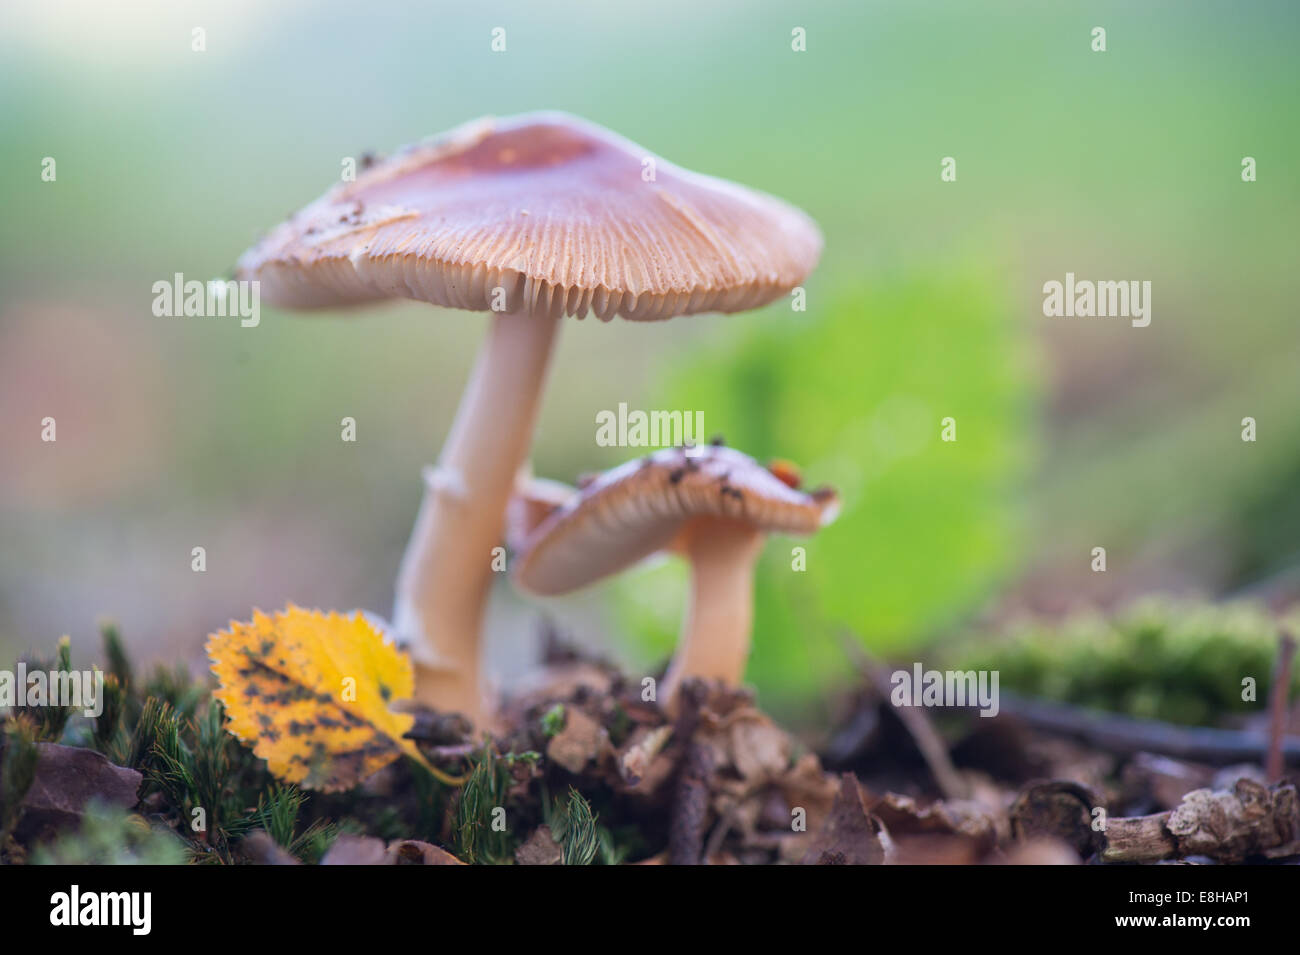 Mushrooms in nature with leaves Stock Photo